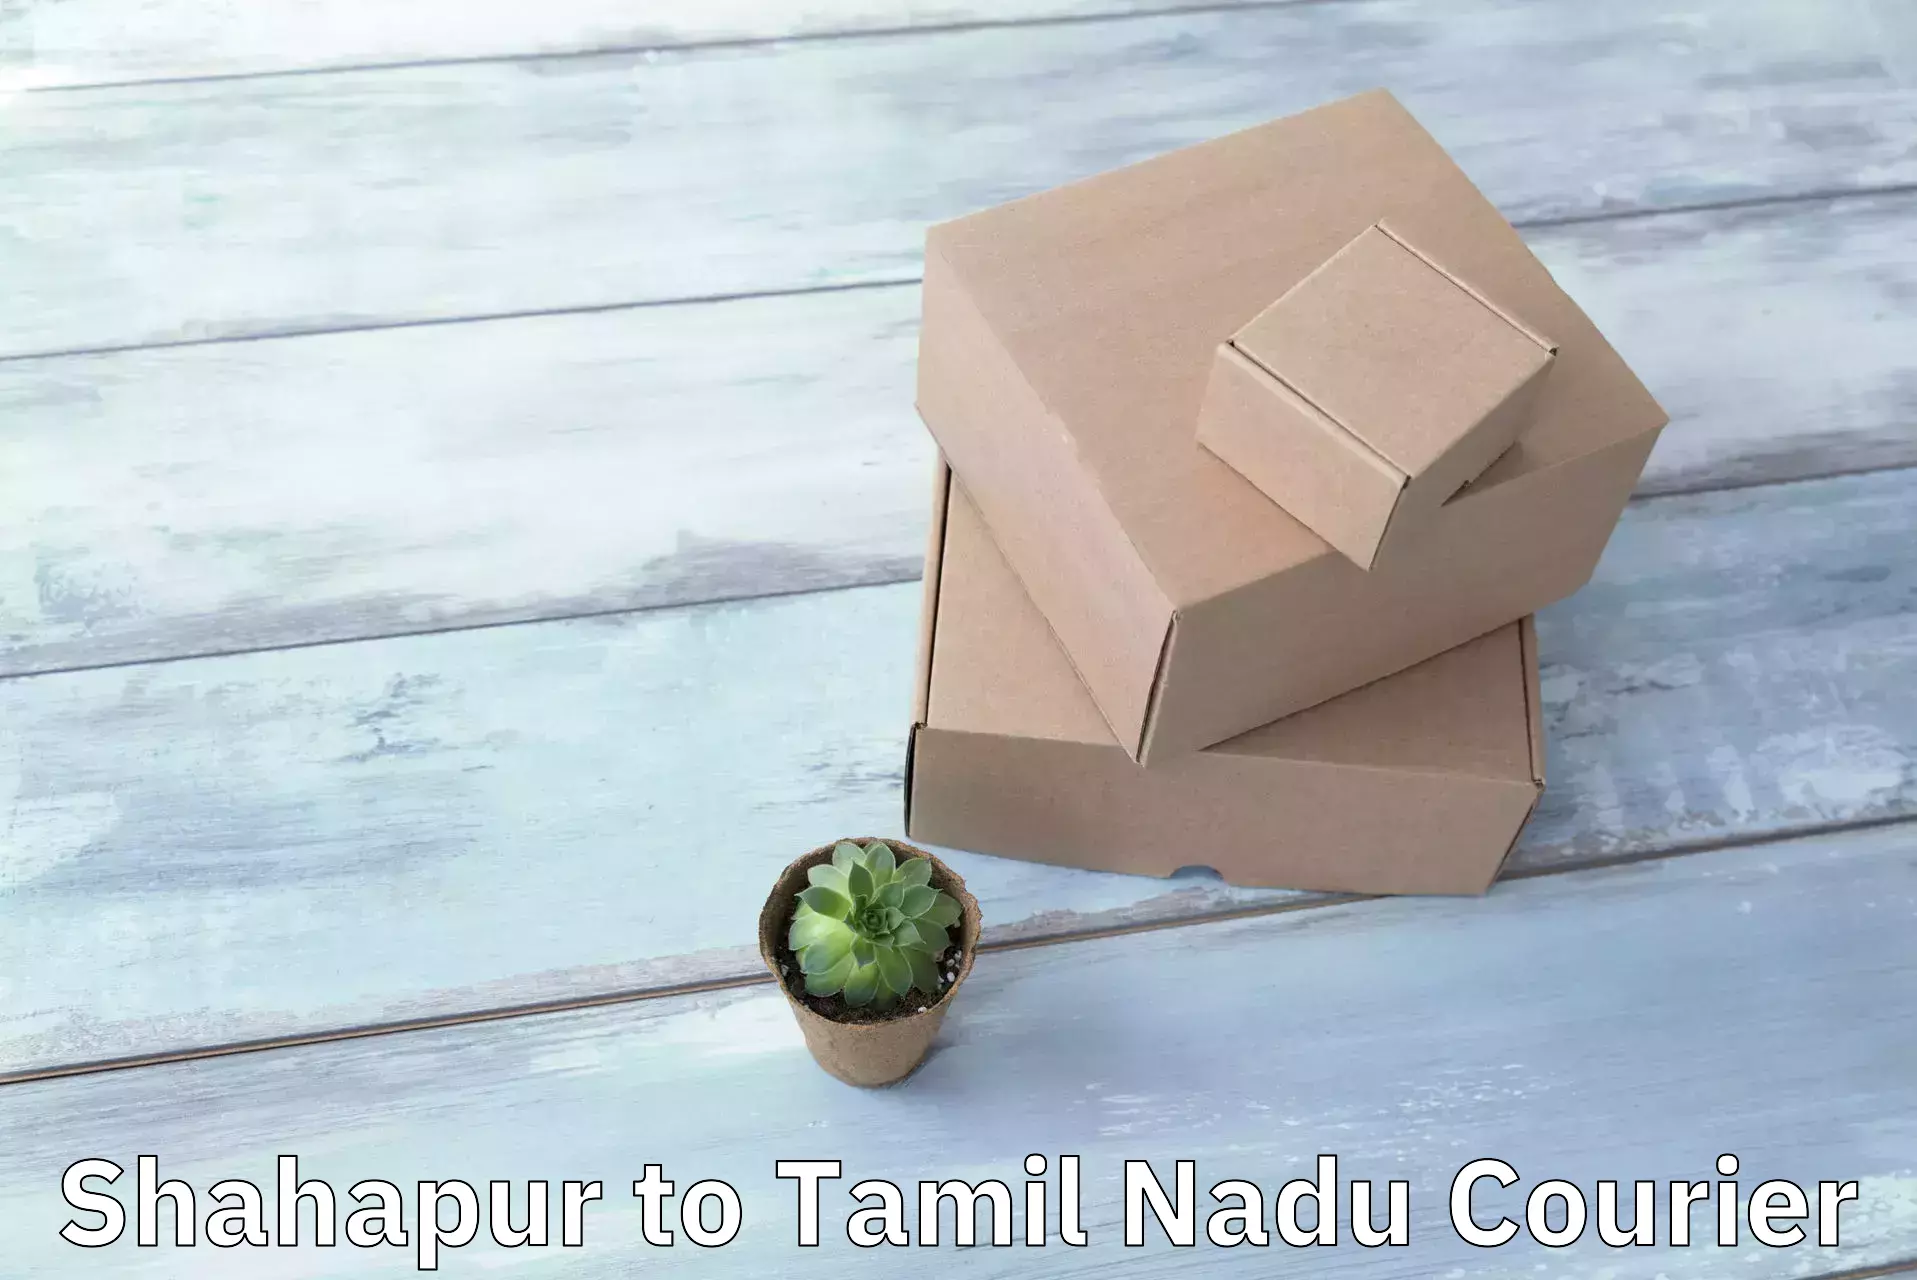 Custom courier packages Shahapur to Tamil Nadu